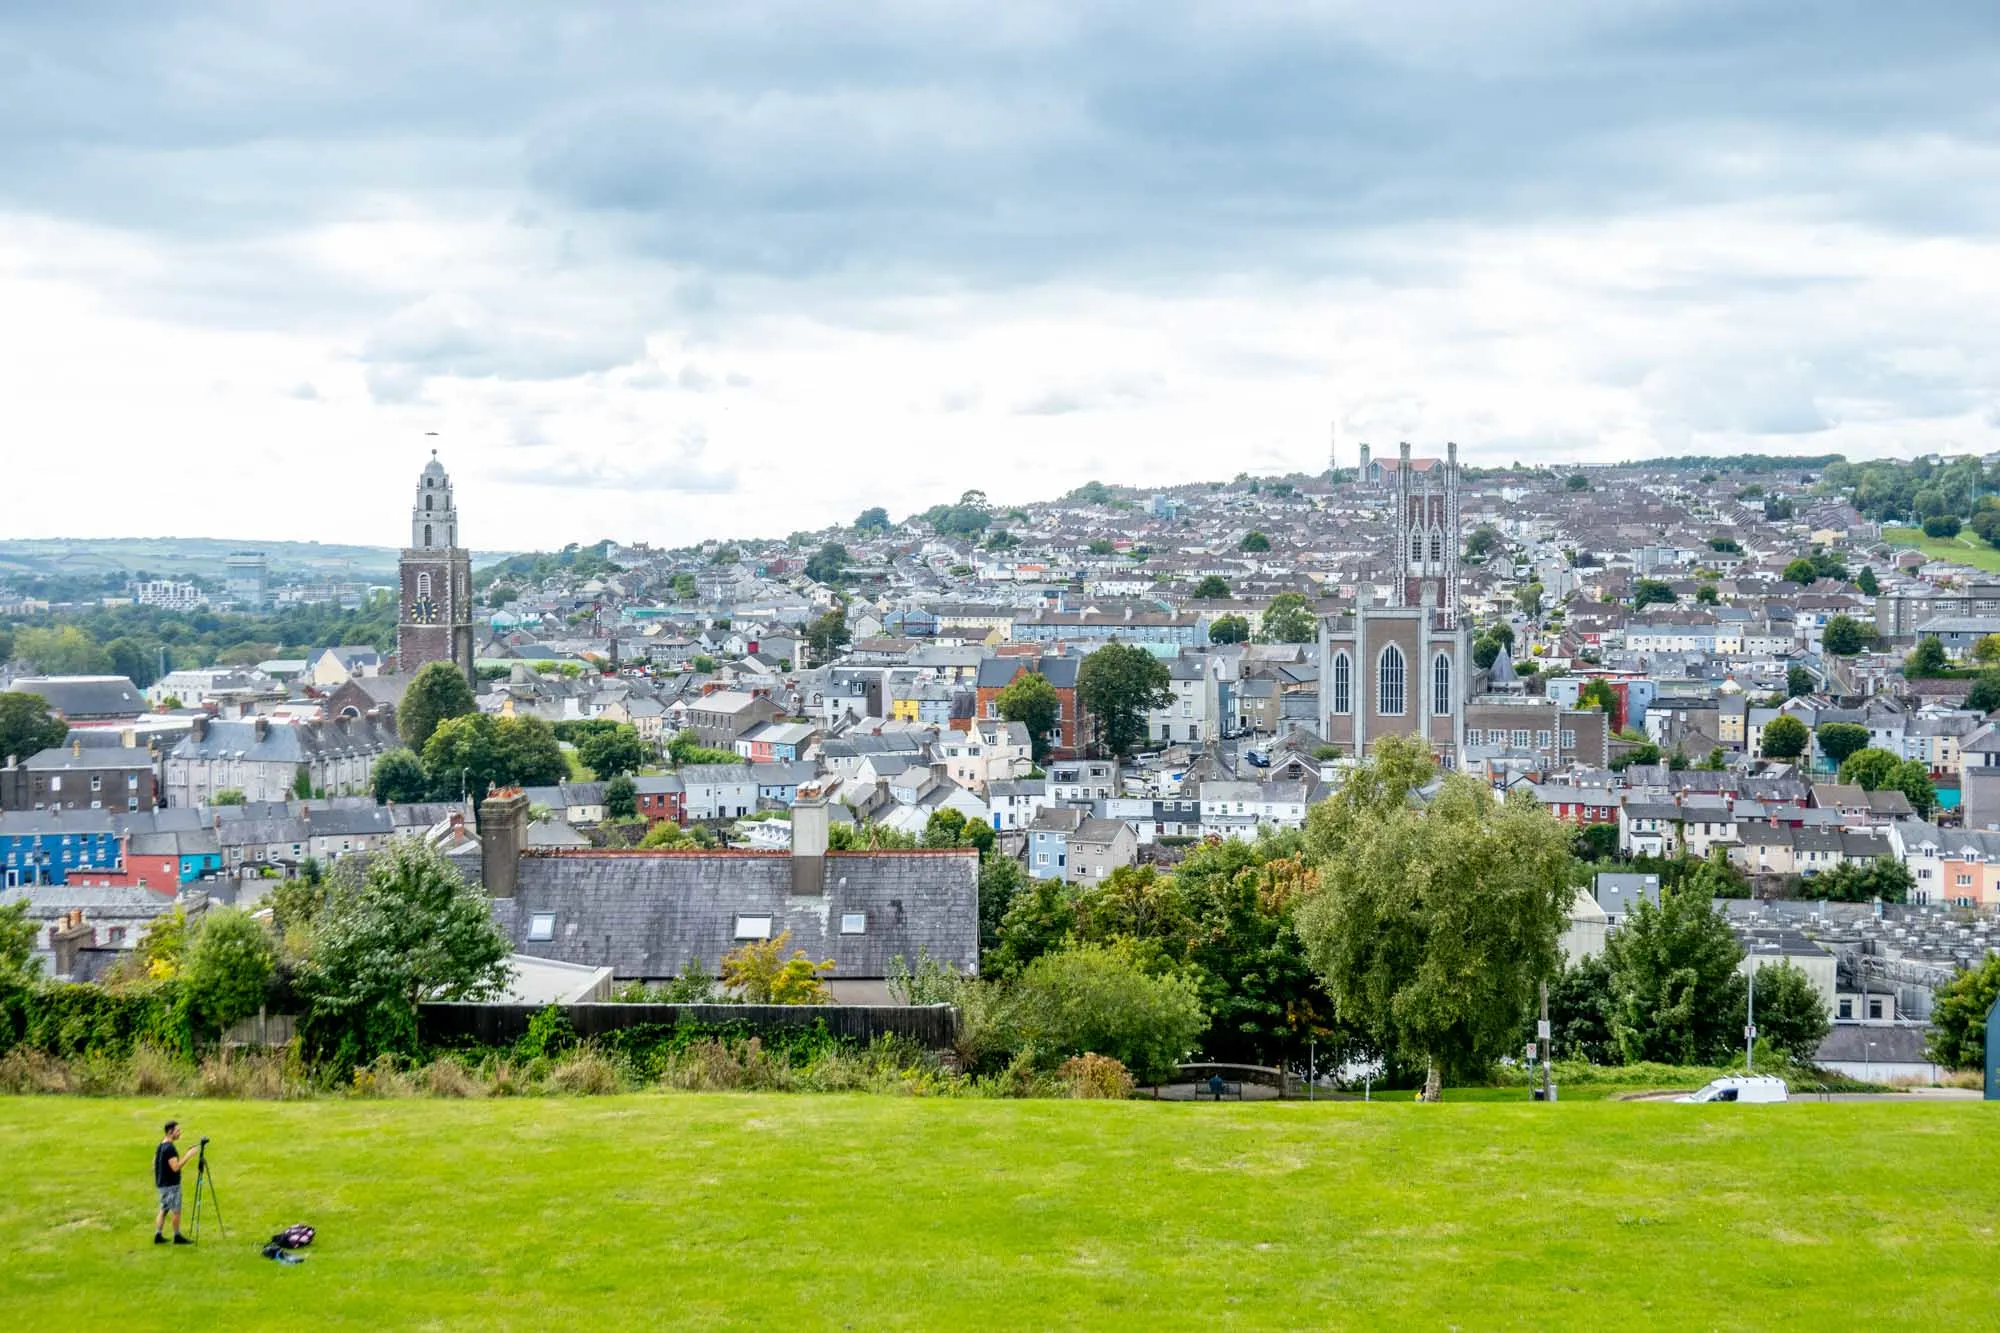 Park overlooking the city of Cork, including churches and numerous buildings on a hill